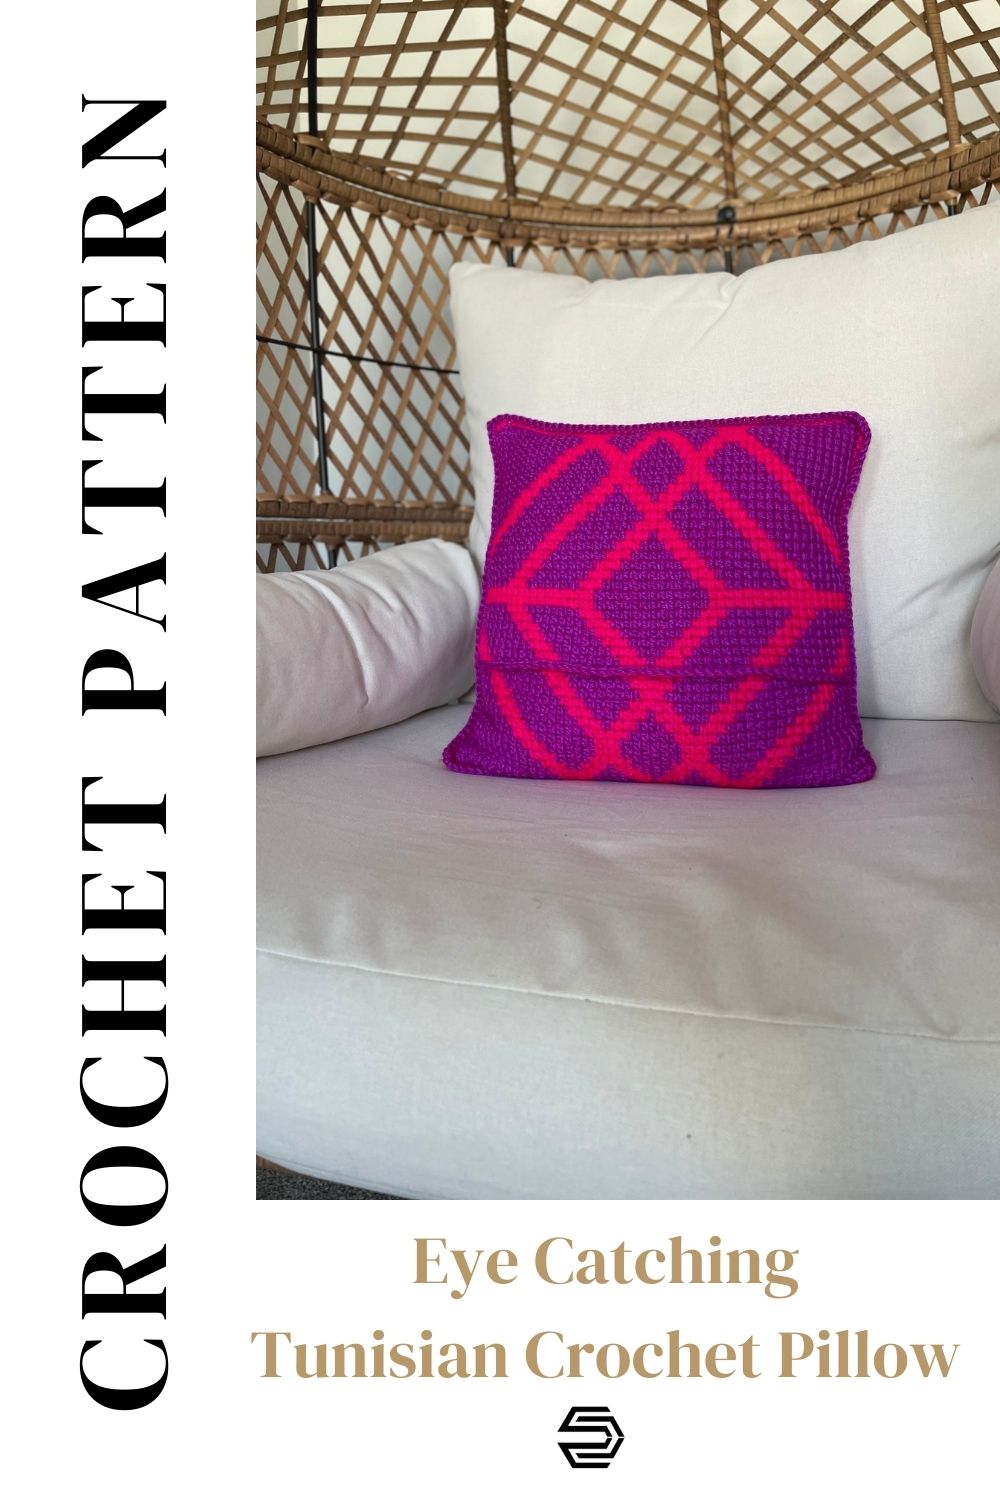 An image of a square tunisian crochet pillow laying in a wicker chair. The tunisian crochet pillow features large overlapping bright pink diamond shapes on a purple background. It is made of two pieces for inserting the pillow form.